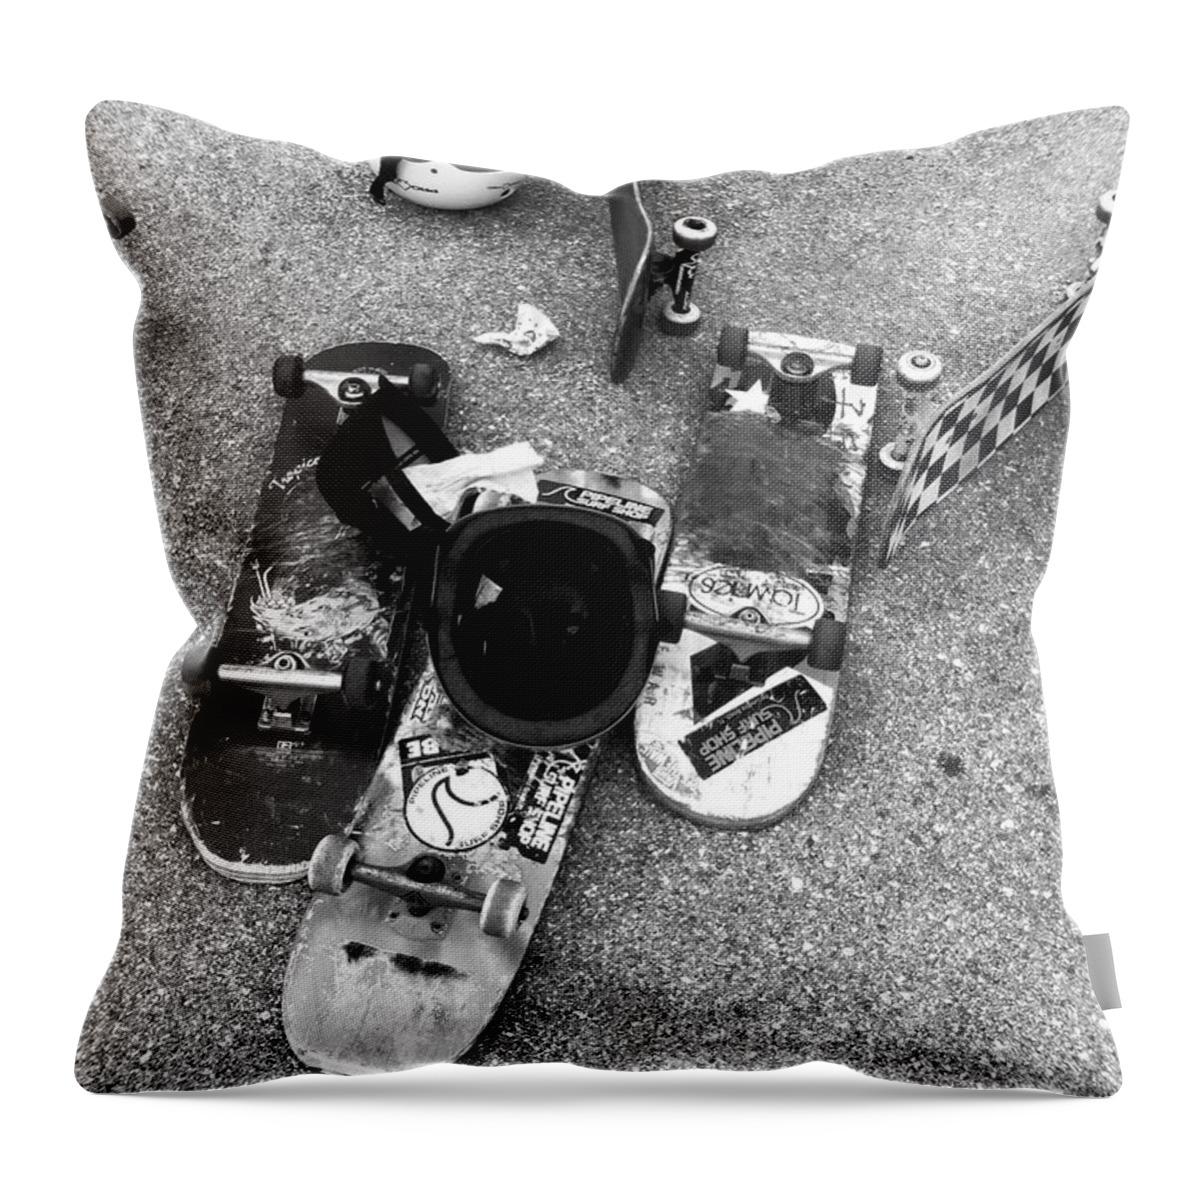 Skate Throw Pillow featuring the photograph Bored Boards by WaLdEmAr BoRrErO